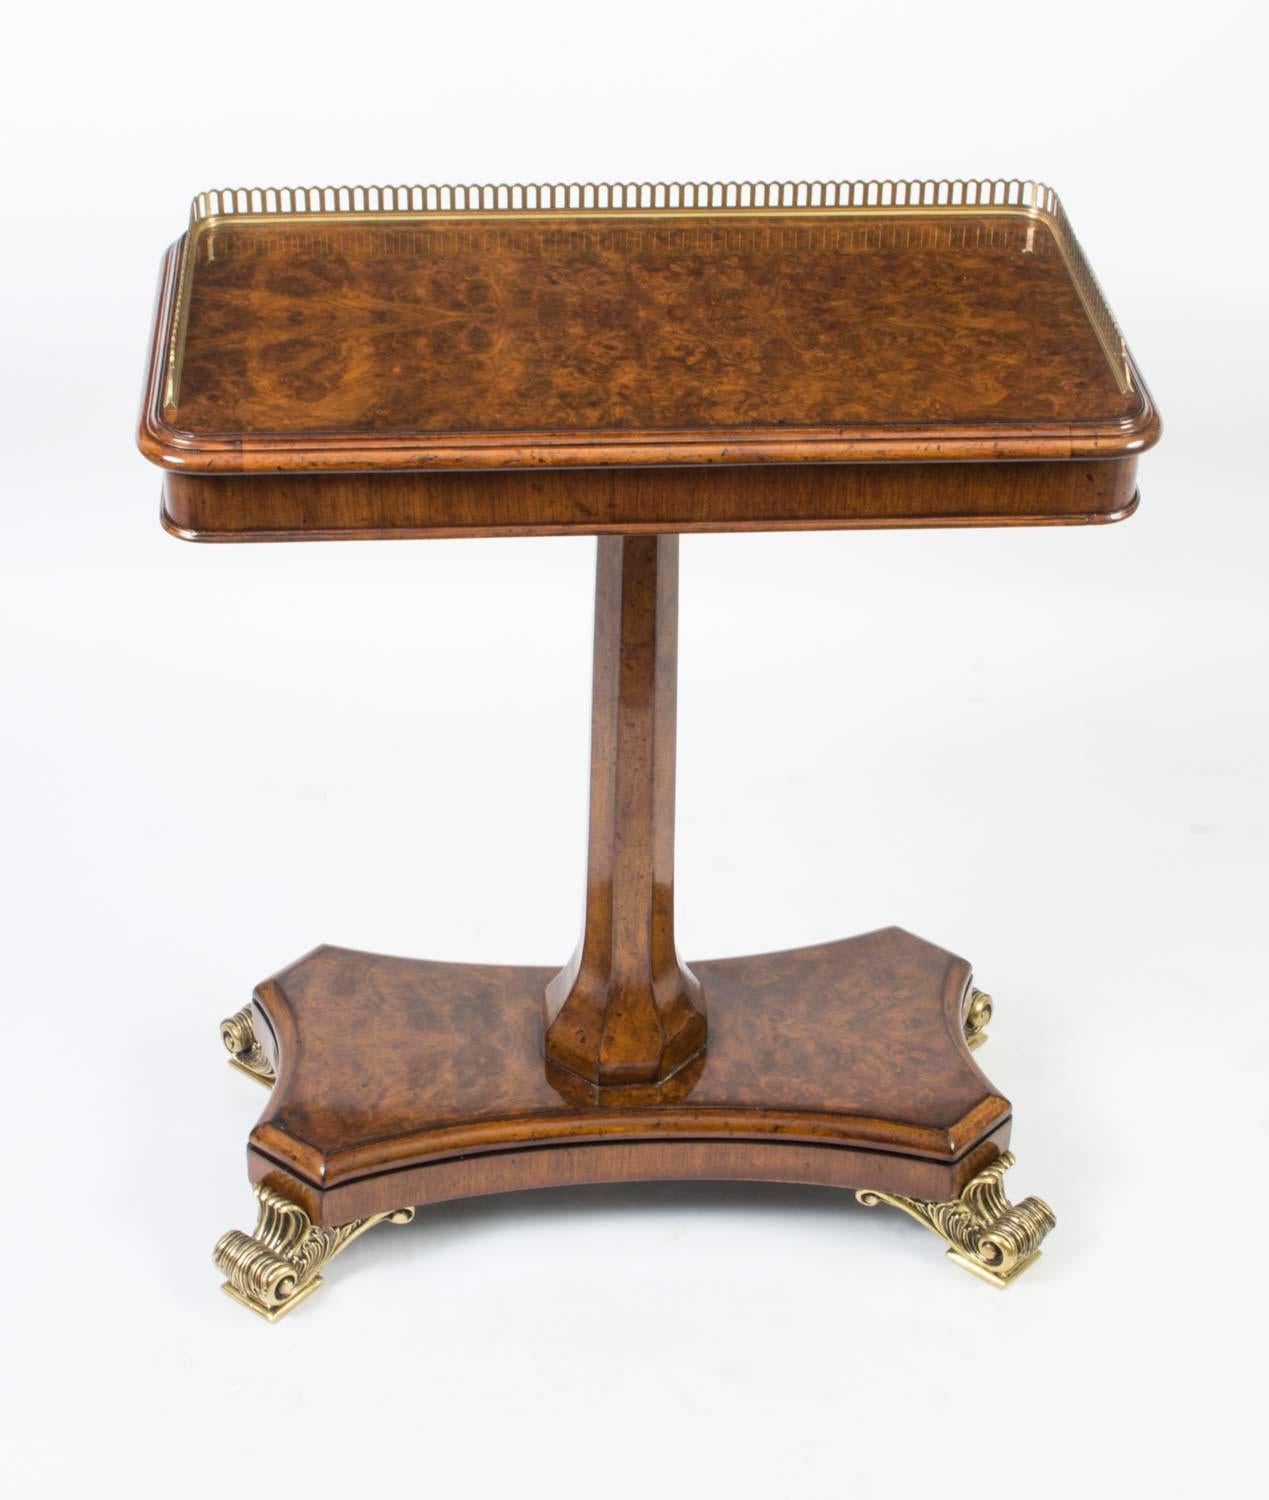 This is a handsome pair of  Vintage Regency Revival occasional tables dating from the late 20th Century.

They have been masterfully created by in gorgeous burr walnut with  brass galleries and elegant ormolu feet.

Perfect at the ends of a sofa as 